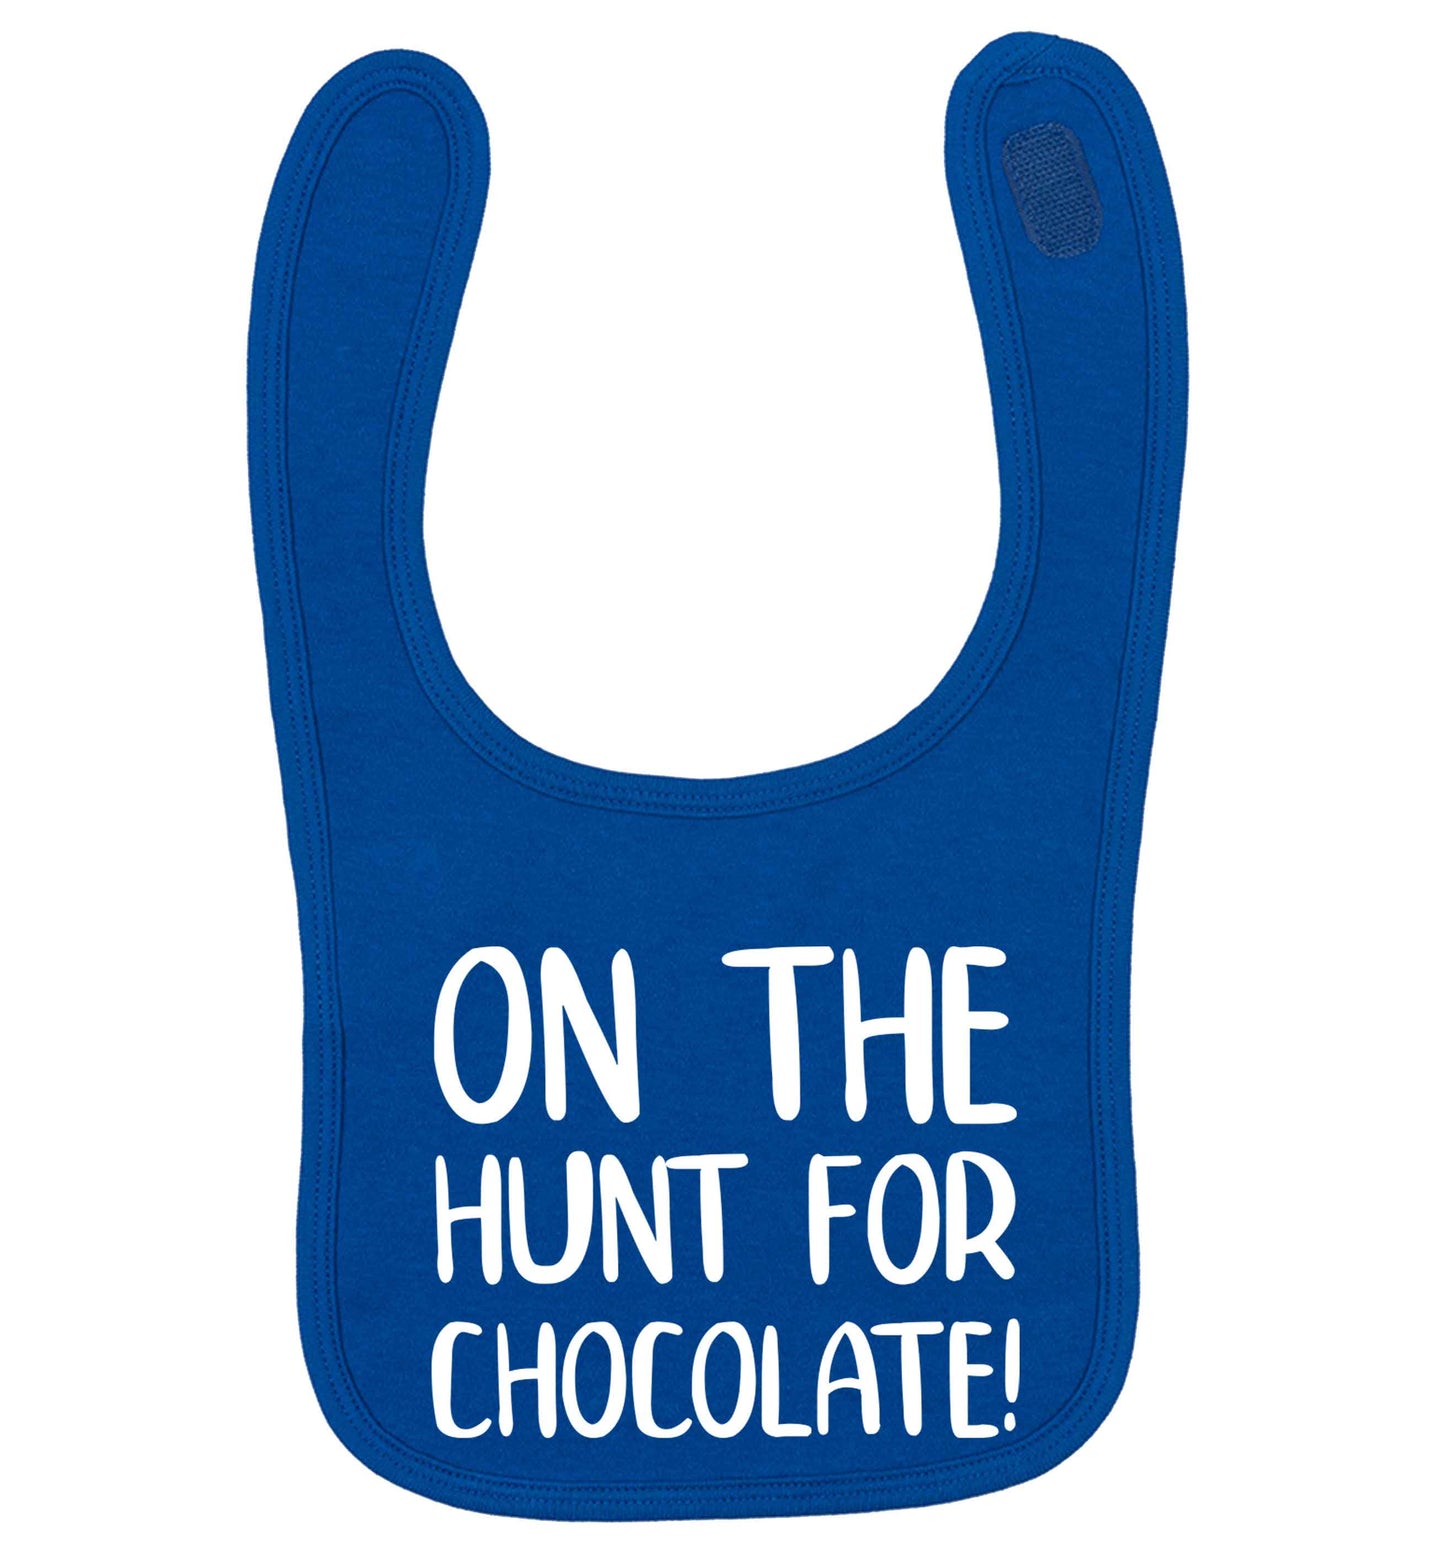 On the hunt for chocolate! royal blue baby bib